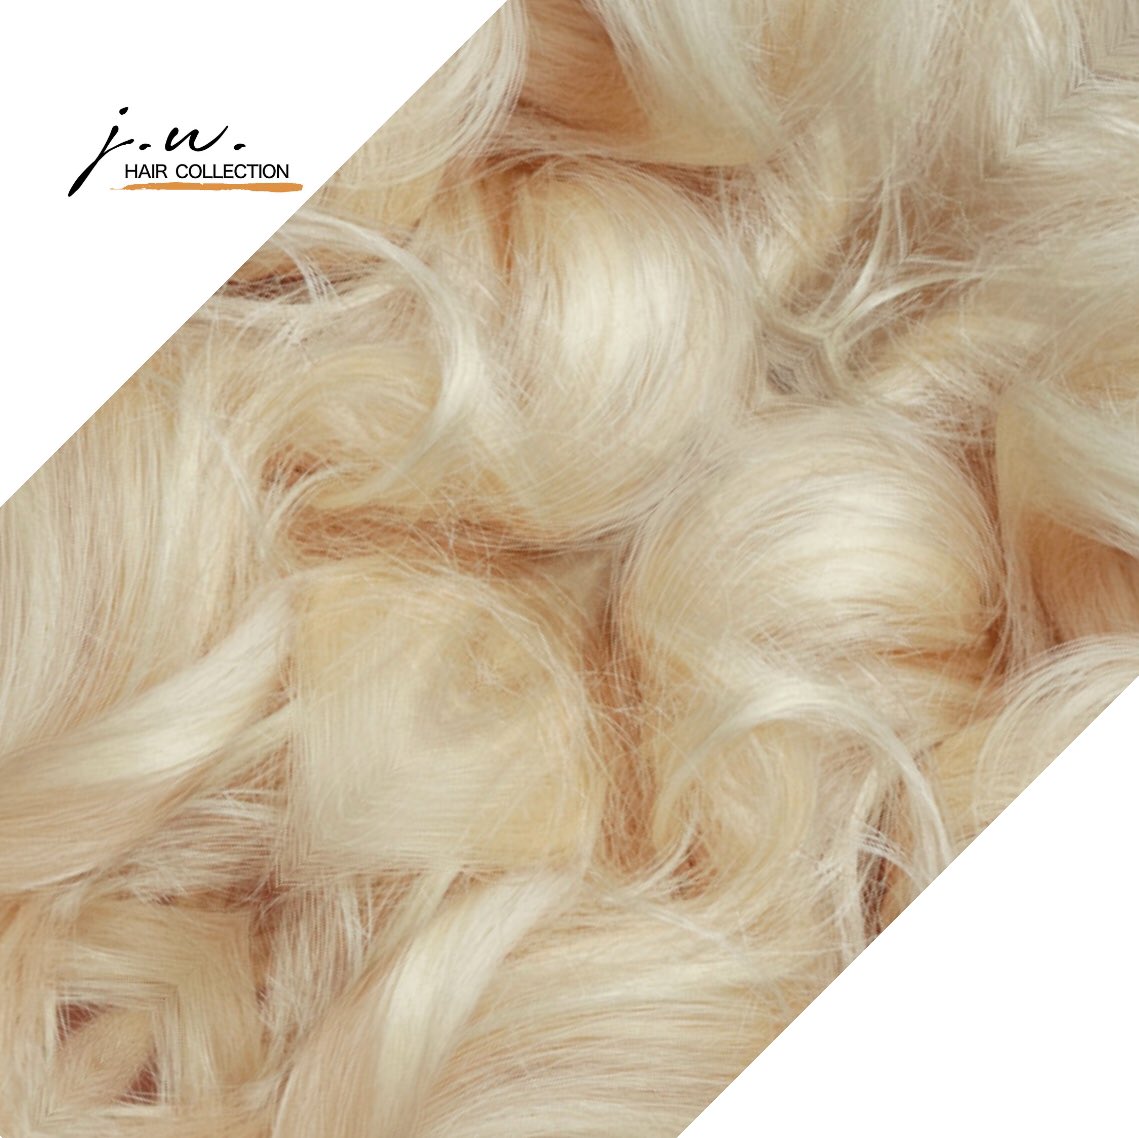 Treat yourself to bundles this holiday season🛍 Go Blonde with J.W. Hair Collection’s Blonde Body Wave!
jwhaircollection.com 

#blondebundles #jwdoll🧡 #hairextensions